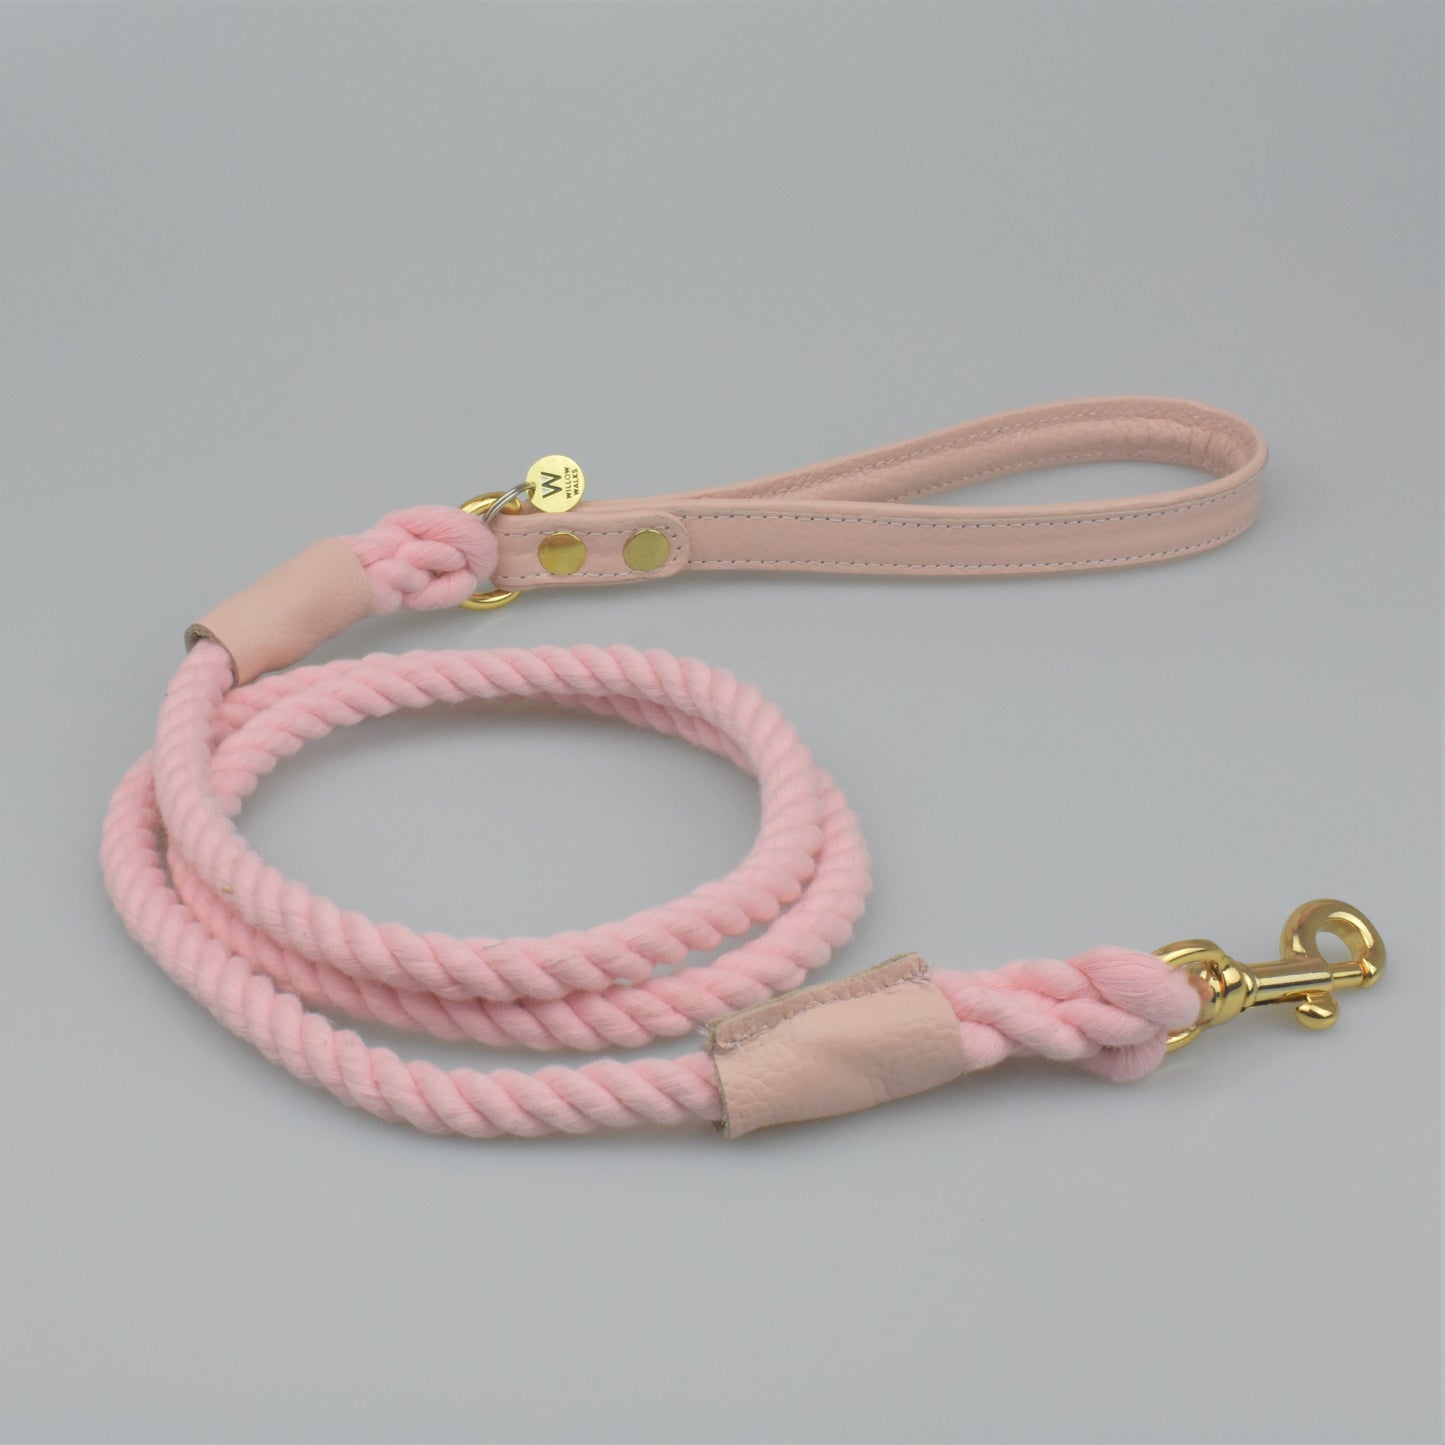 Willow Walks rope lead with leather handle in soft pink